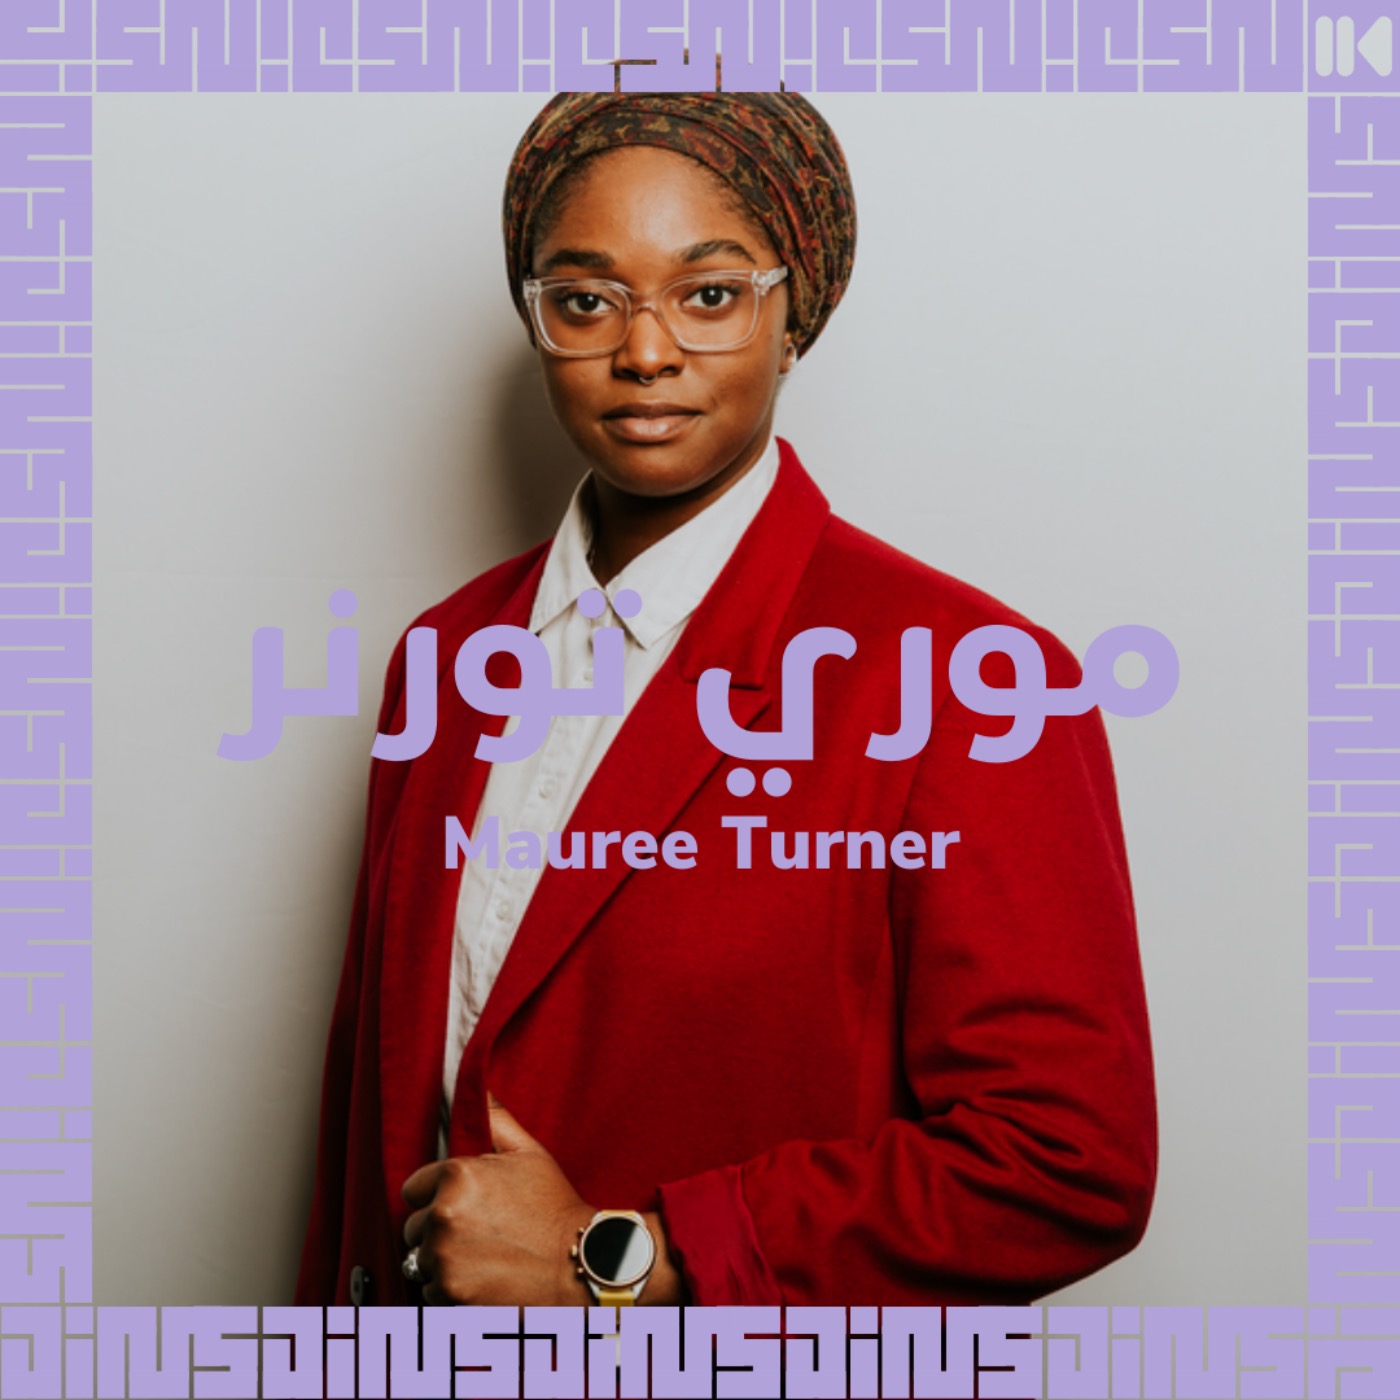 EP 16 : Being an intersectional person in politics - with Mauree TURNER - 🇺🇸